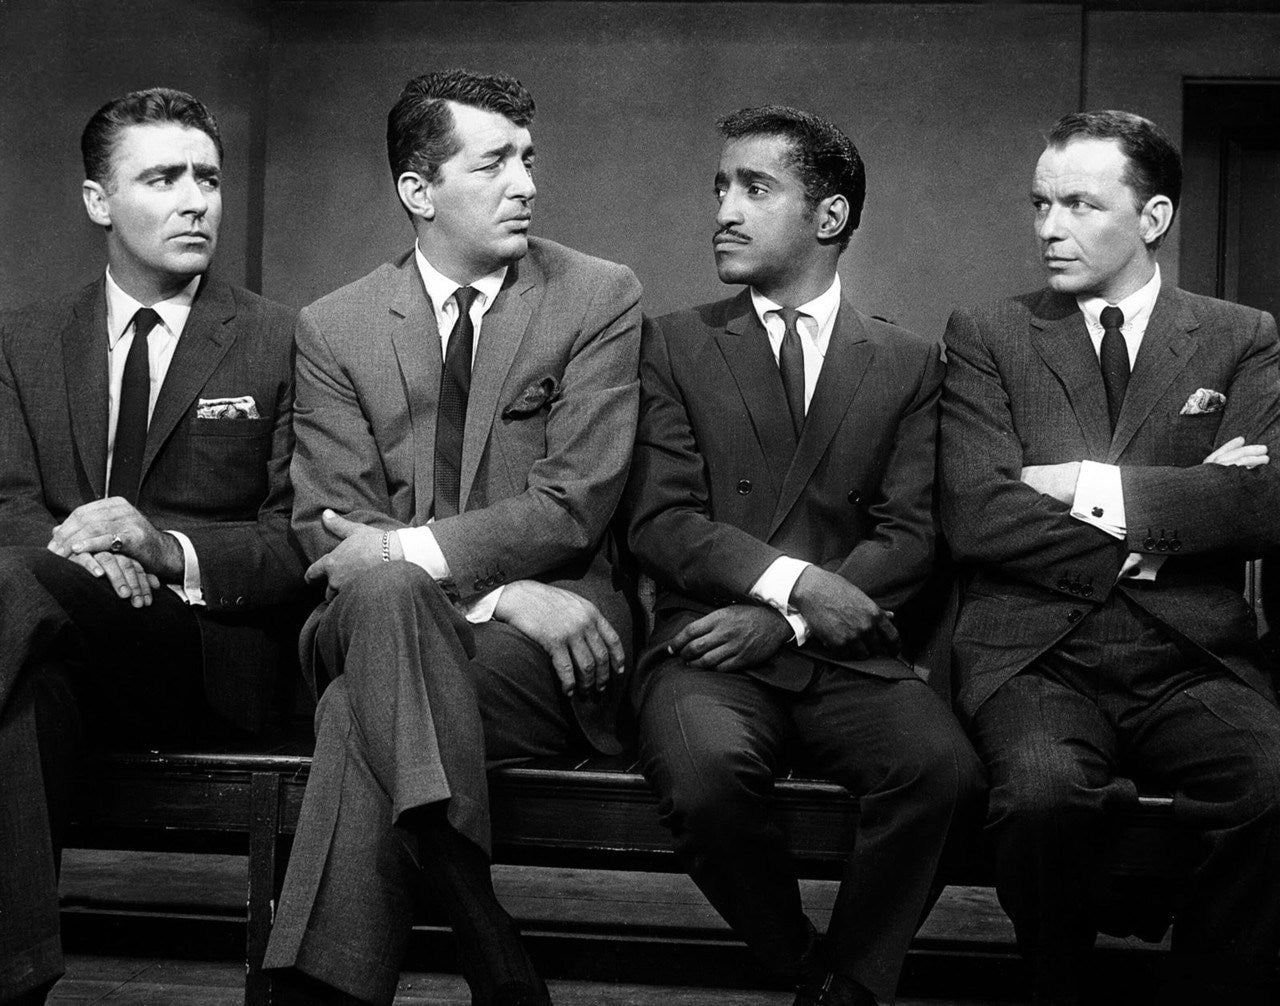 The Rat Pack during a scene in Ocean's Eleven